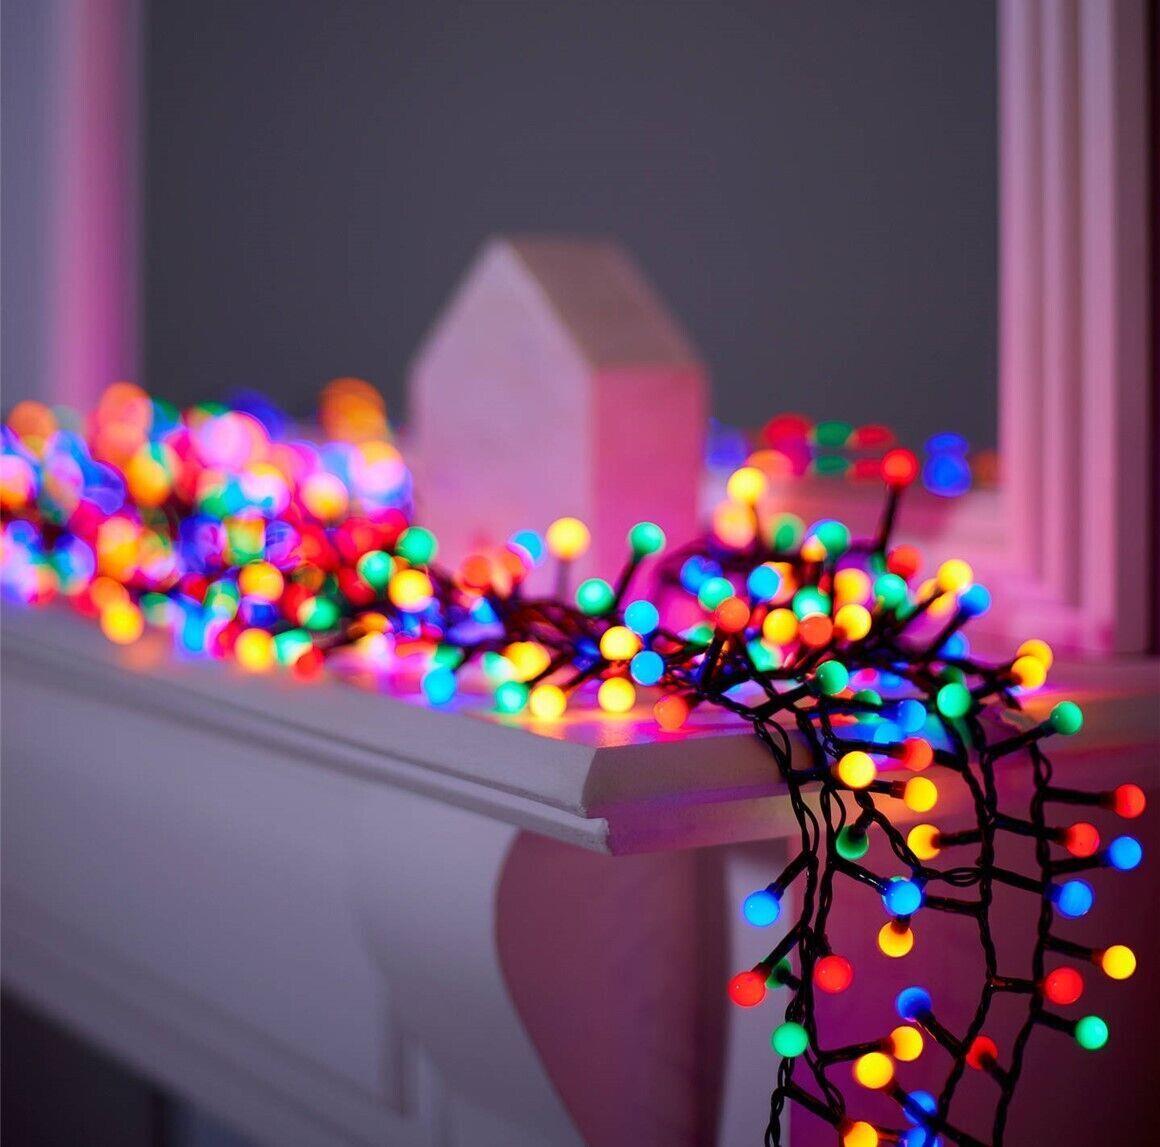 100 Berry Christmas LED Lights Multicolour by Geezy - UKBuyZone